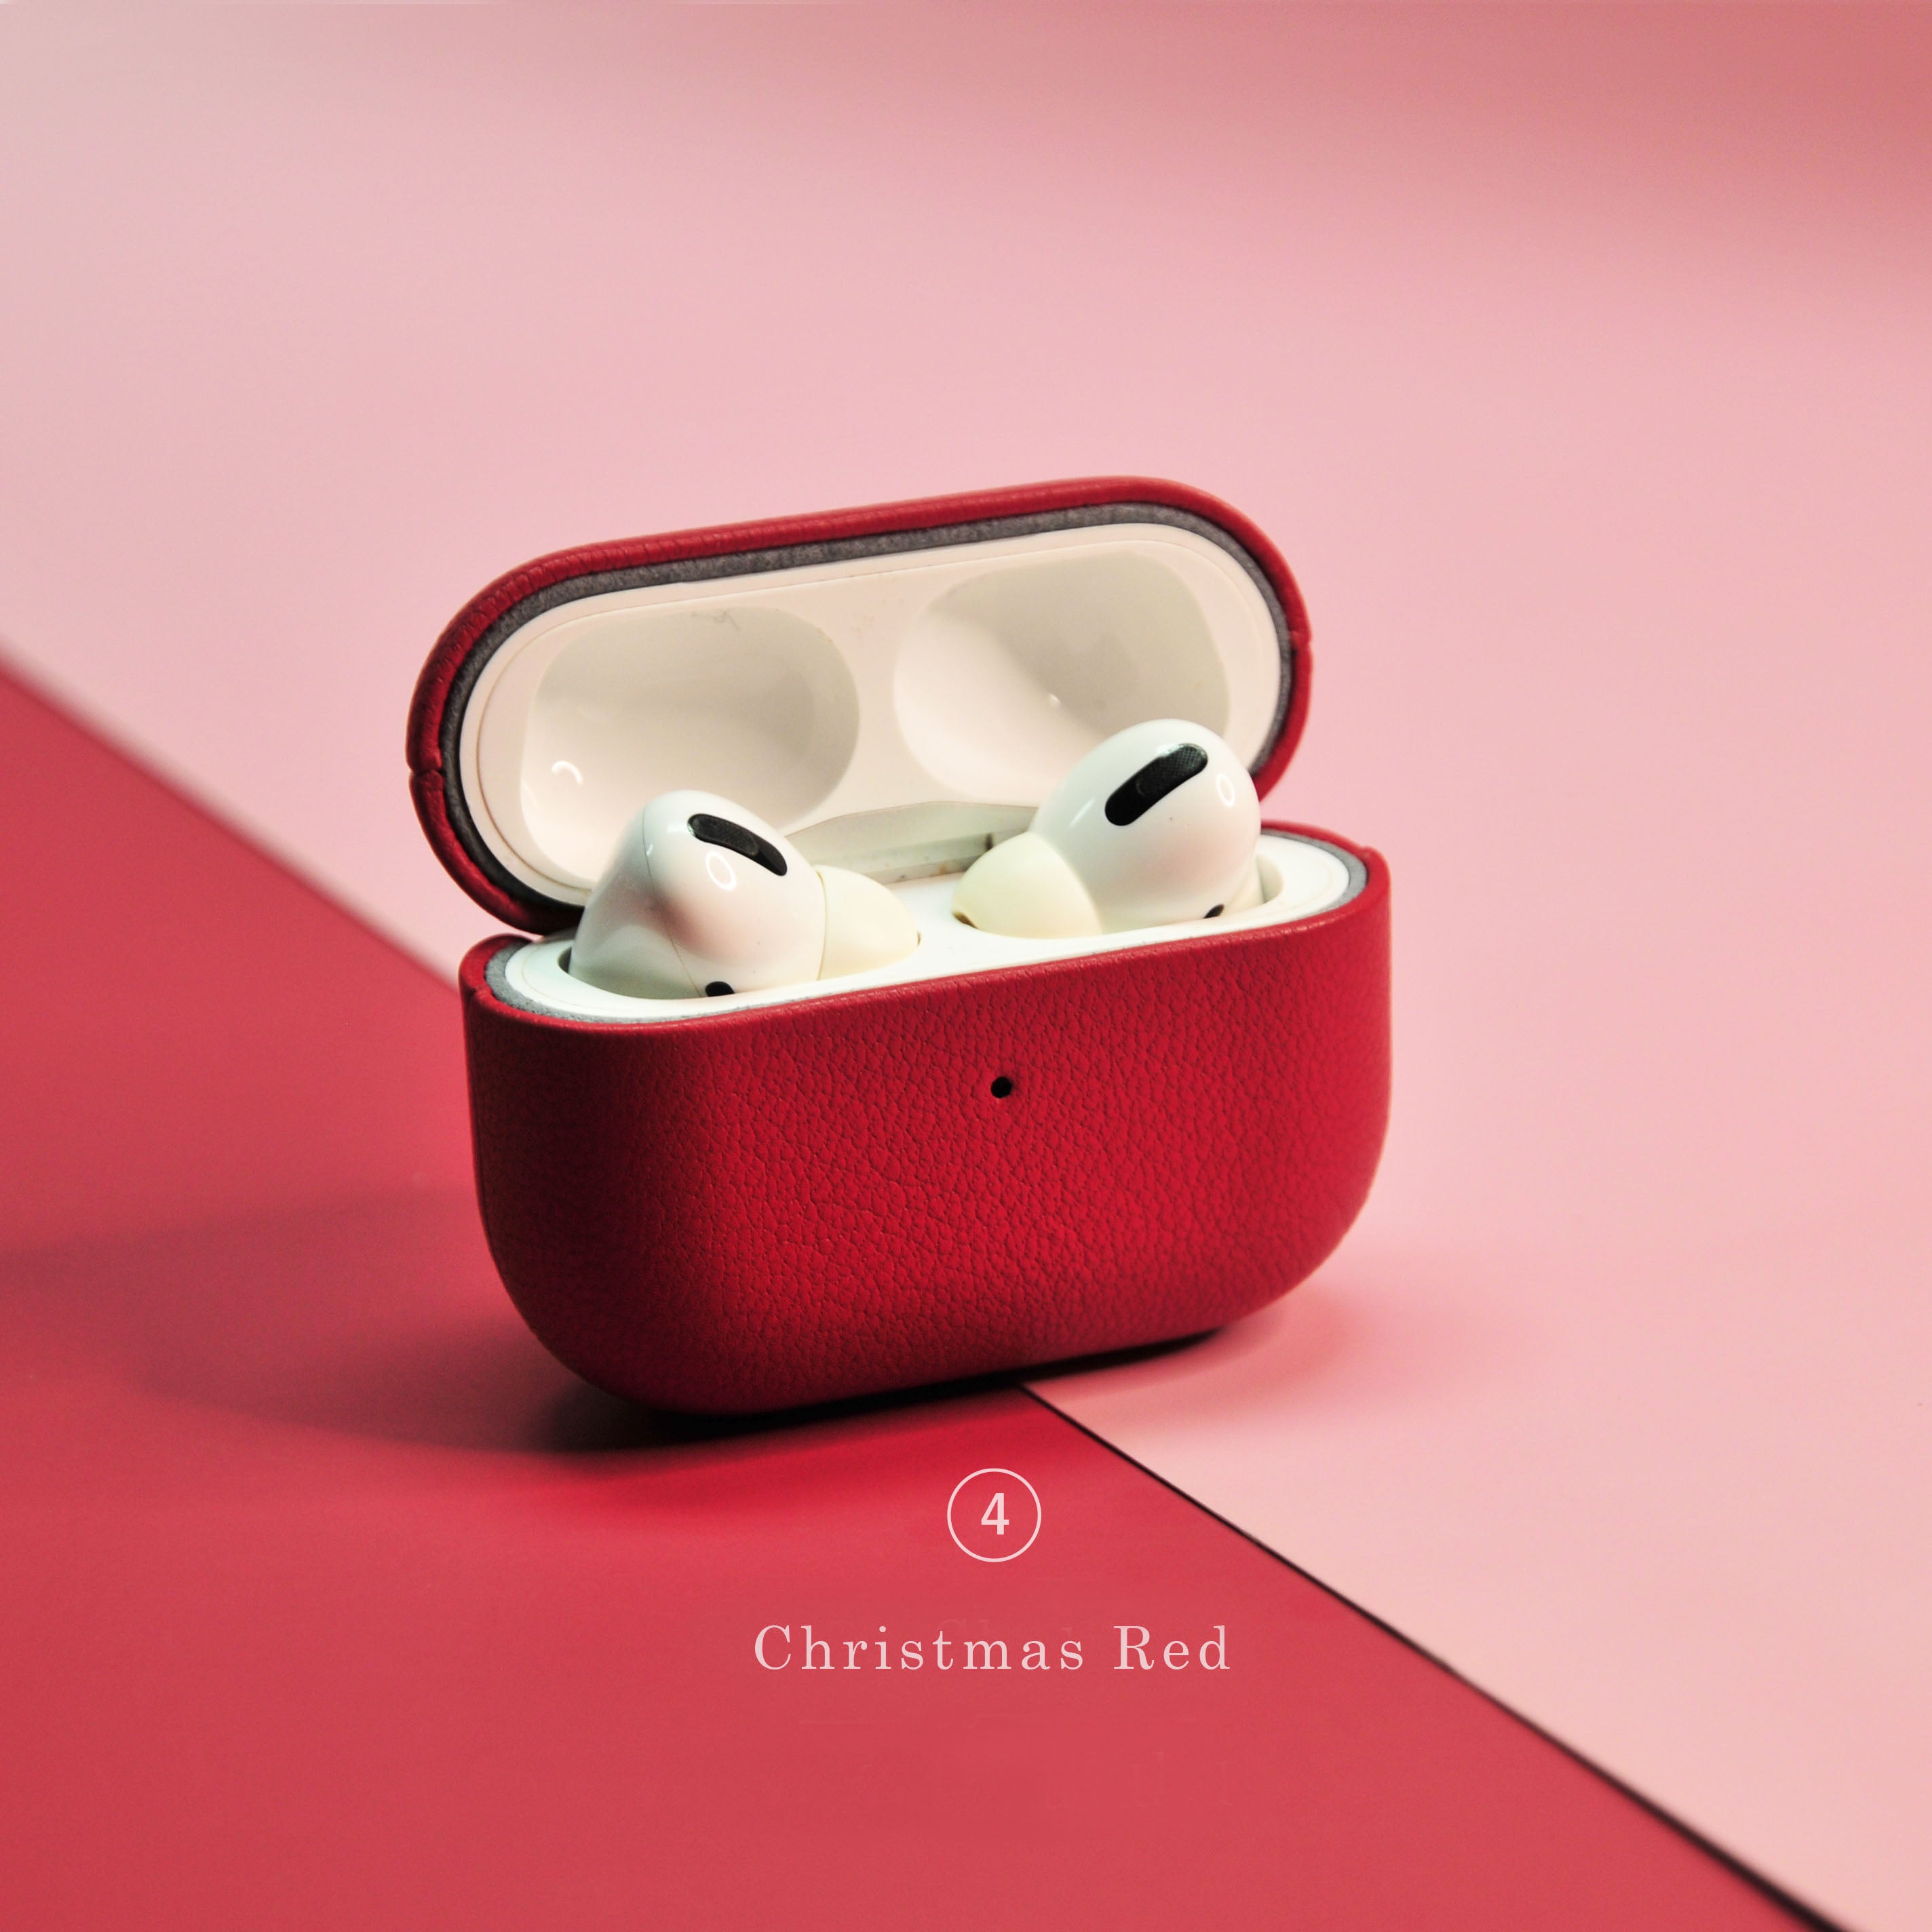 Christmas Red Leather AirPod Case